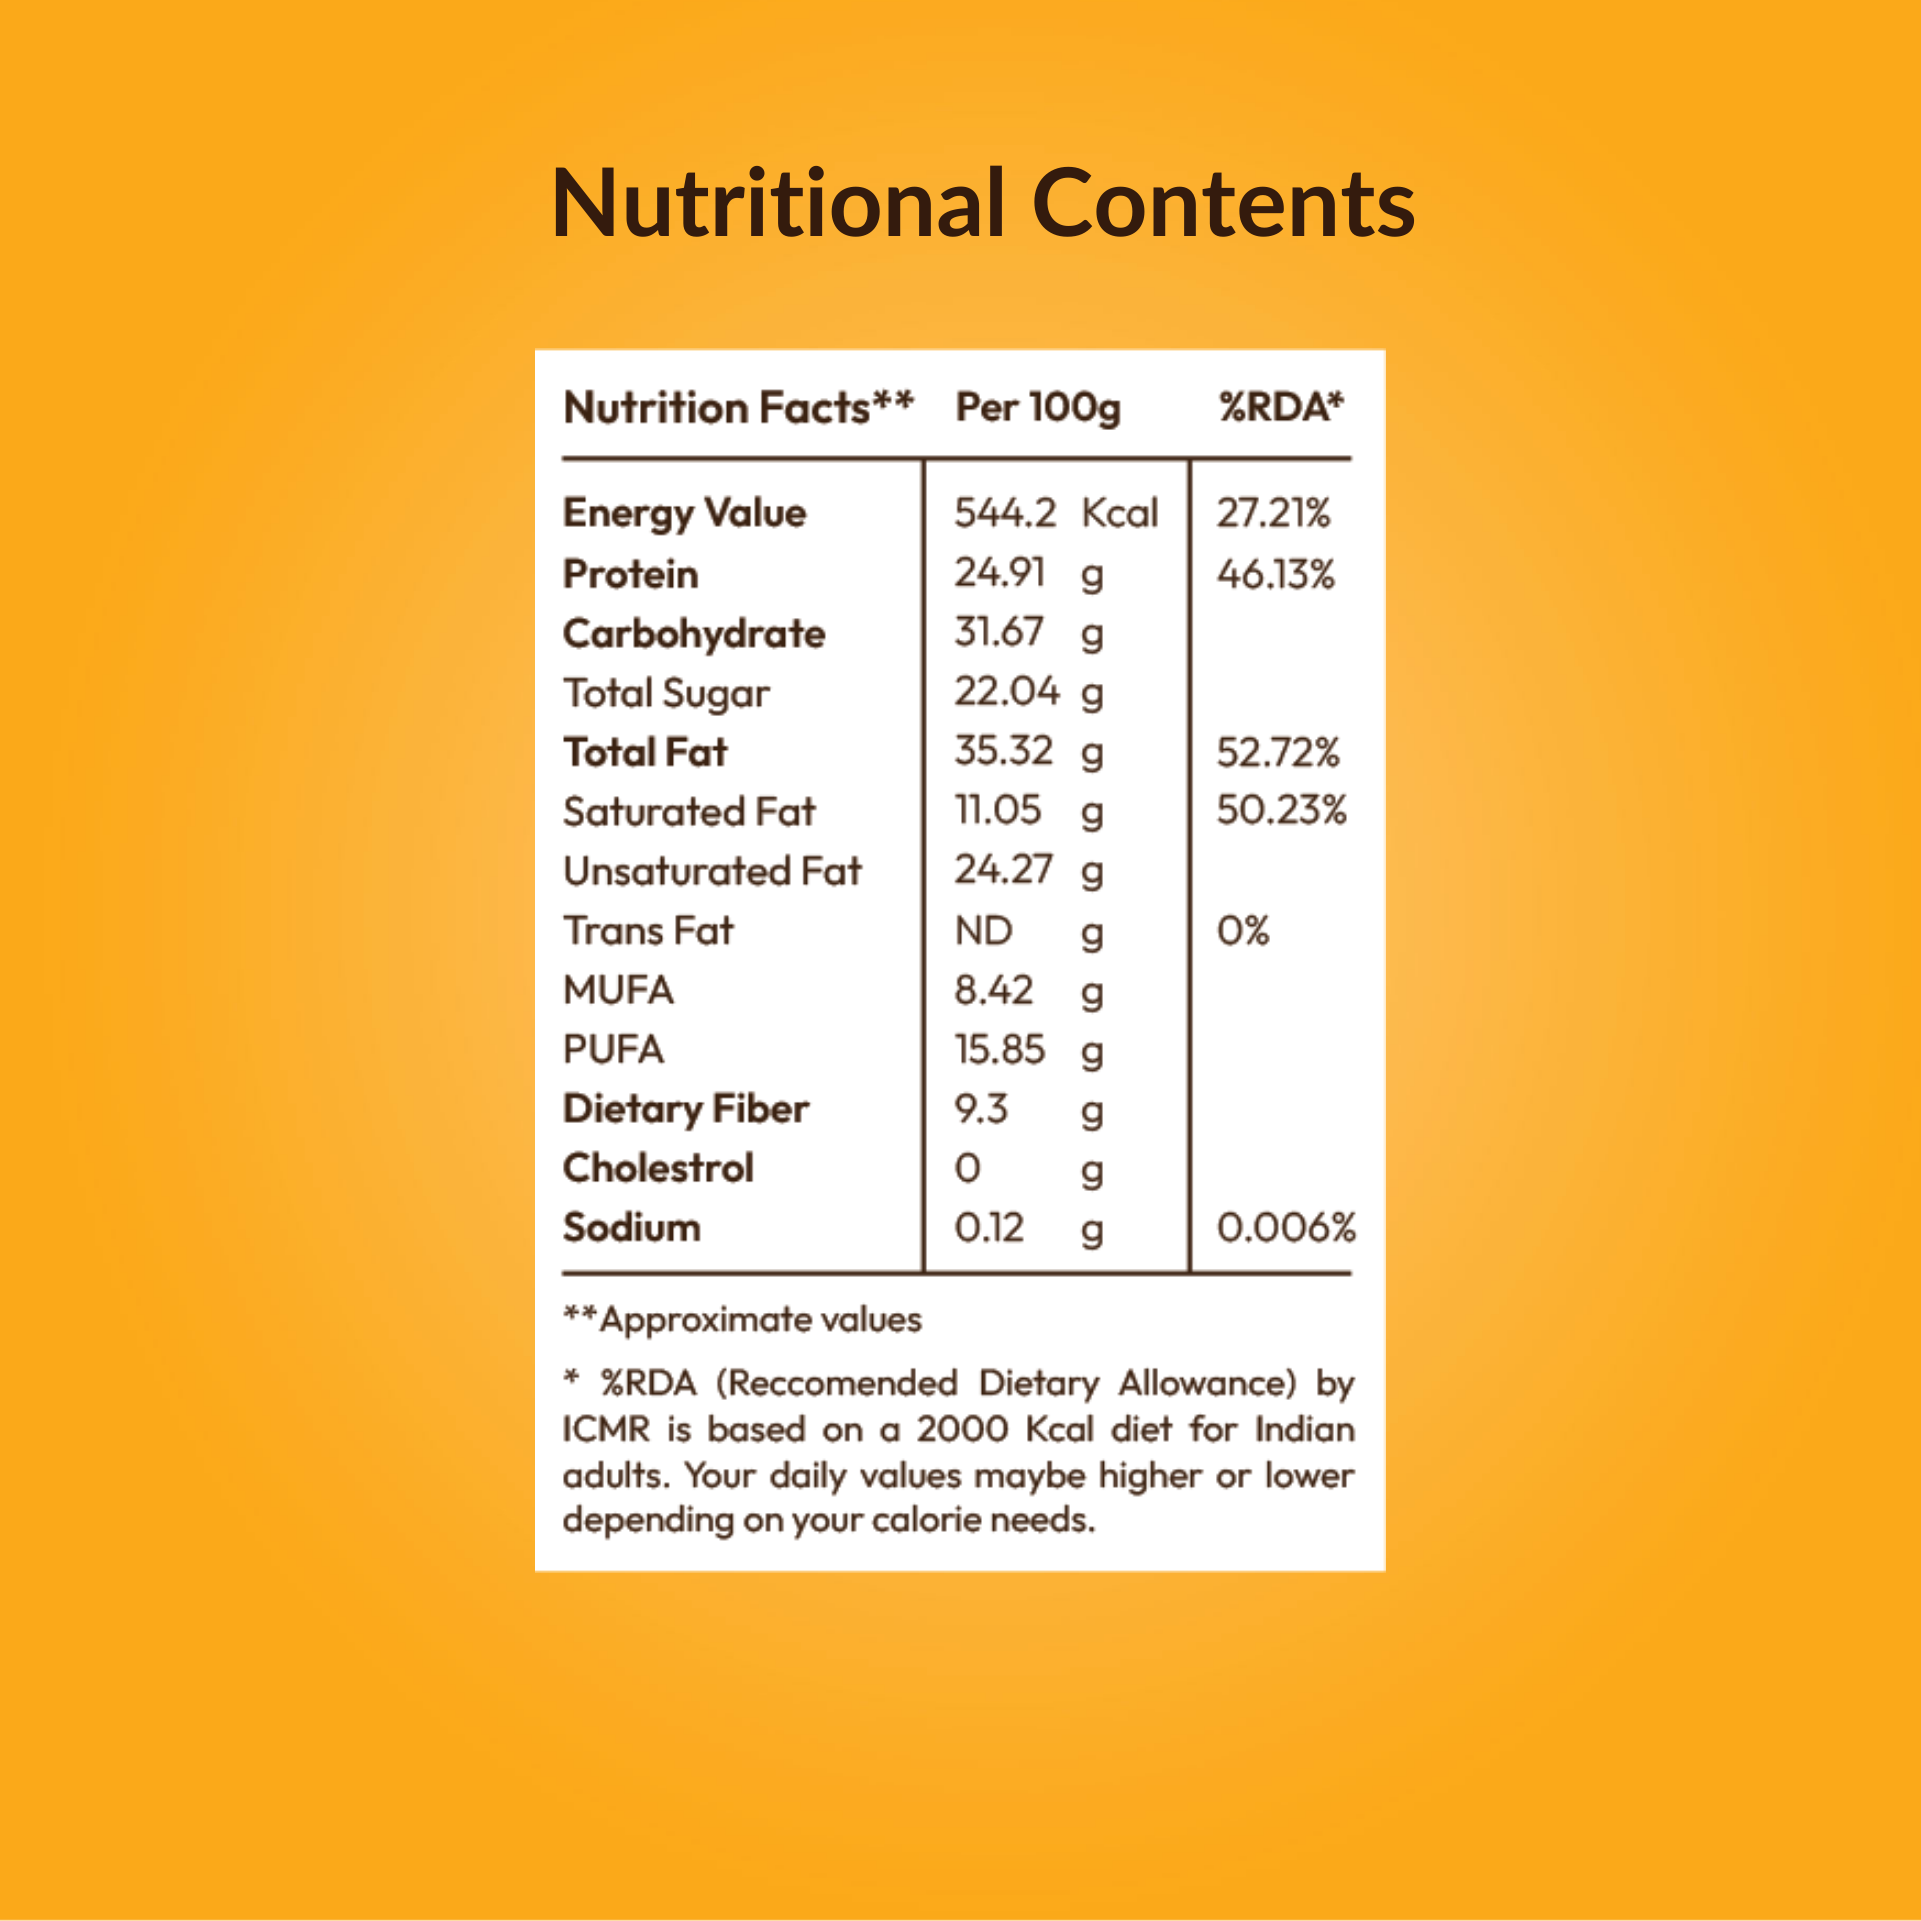 powernoms high protein mix nutrition content table